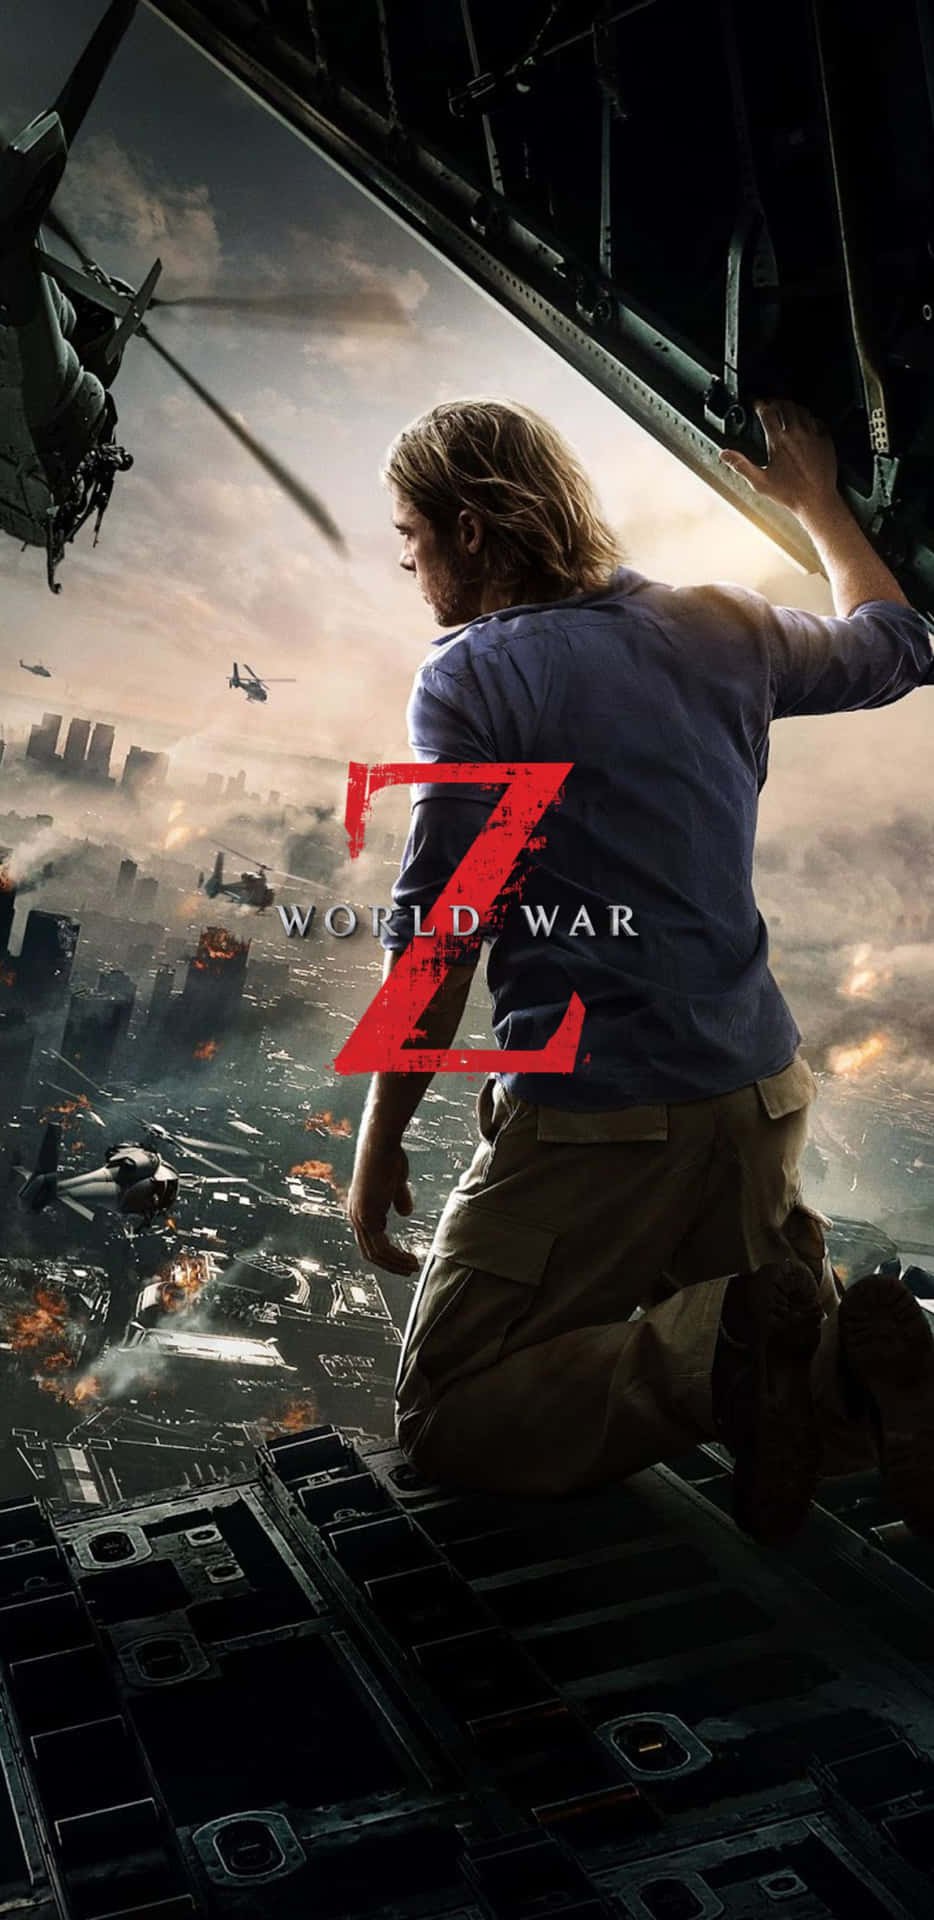 "Take a Dive into the Action with the Pixel 3XL and the Thrilling Movie Experience of World War Z"